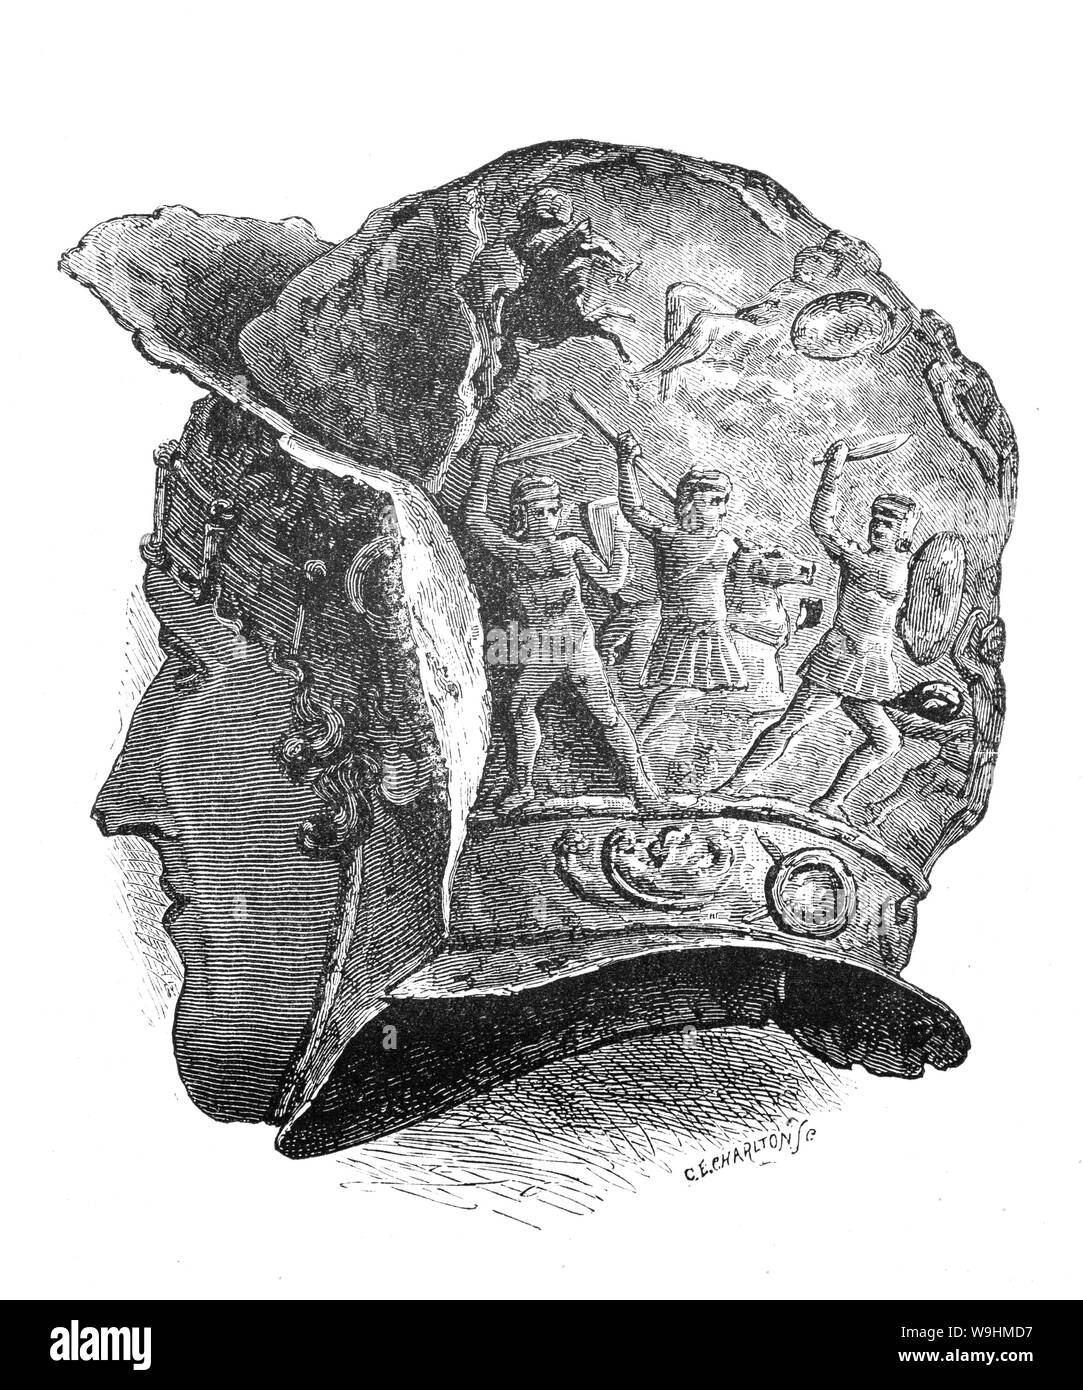 A 1st Century BCE votive helmet, an object displayed or deposited, without the intention of recovery or use, in a sacred place for in order to gain favor with supernatural forces.  High status artifacts such as armor and weaponry, fertility and cult symbols, coins, various treasures and animals (often dogs, oxen and in later periods horses) were common offerings in antiquity. Stock Photo